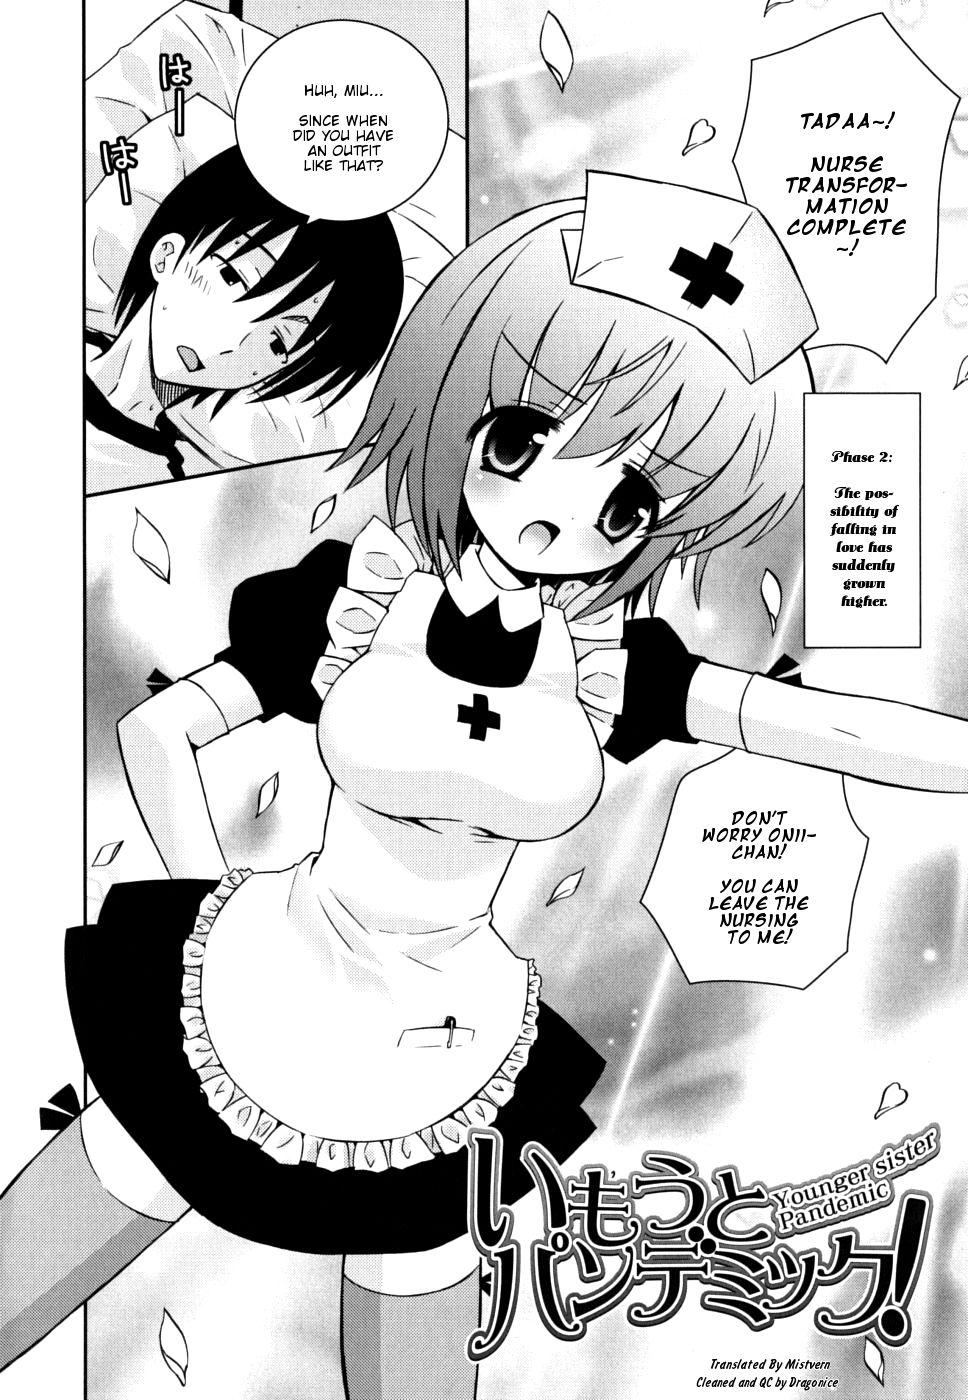 Boy Imouto Pandemic! - Younger sister Pandemic Naked Women Fucking - Page 2